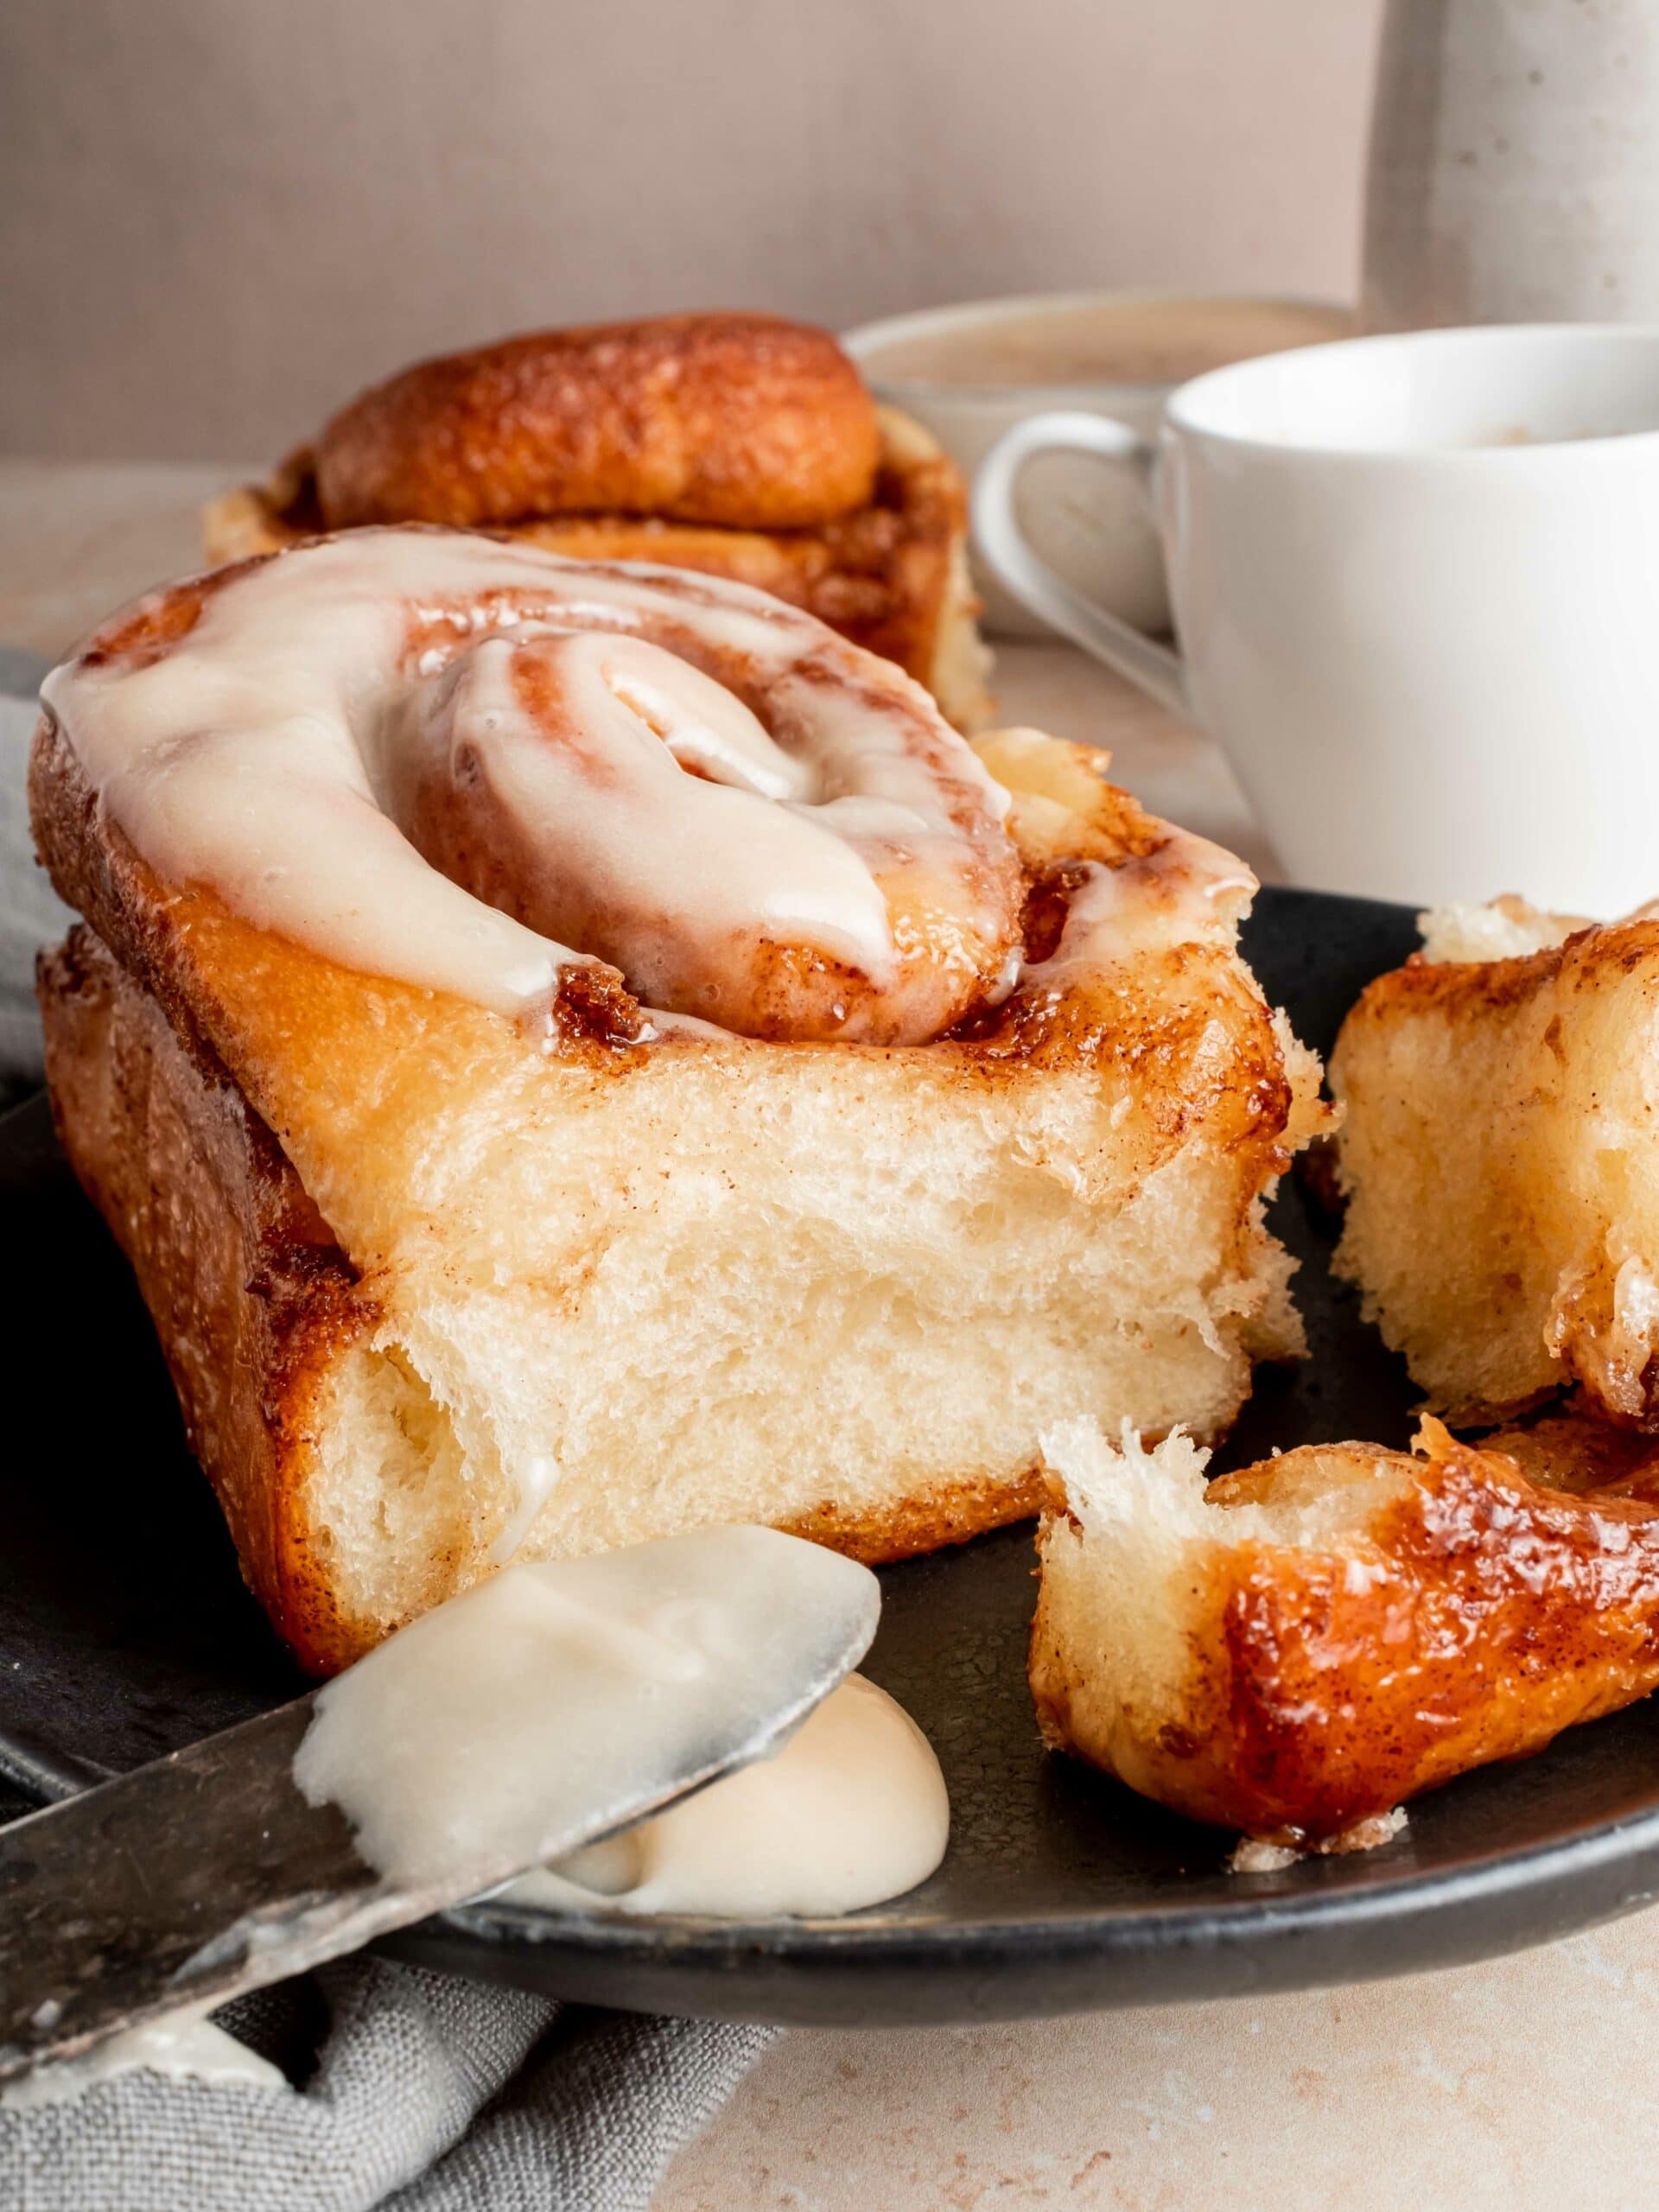 cinnamon roll on plate with frosting and coffee